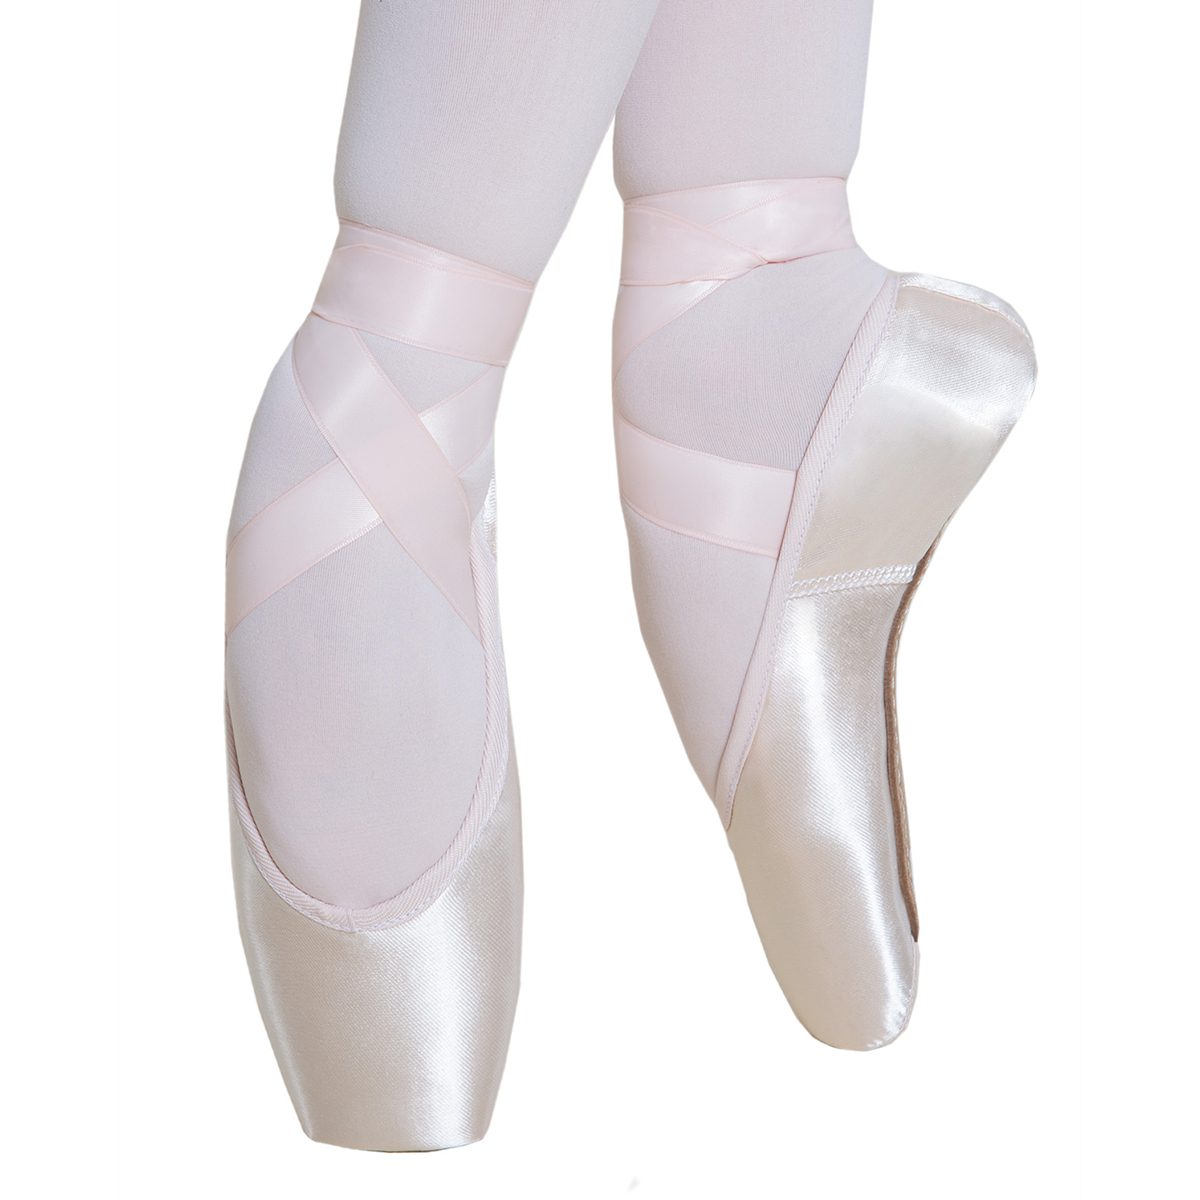 soft shank pointe shoes